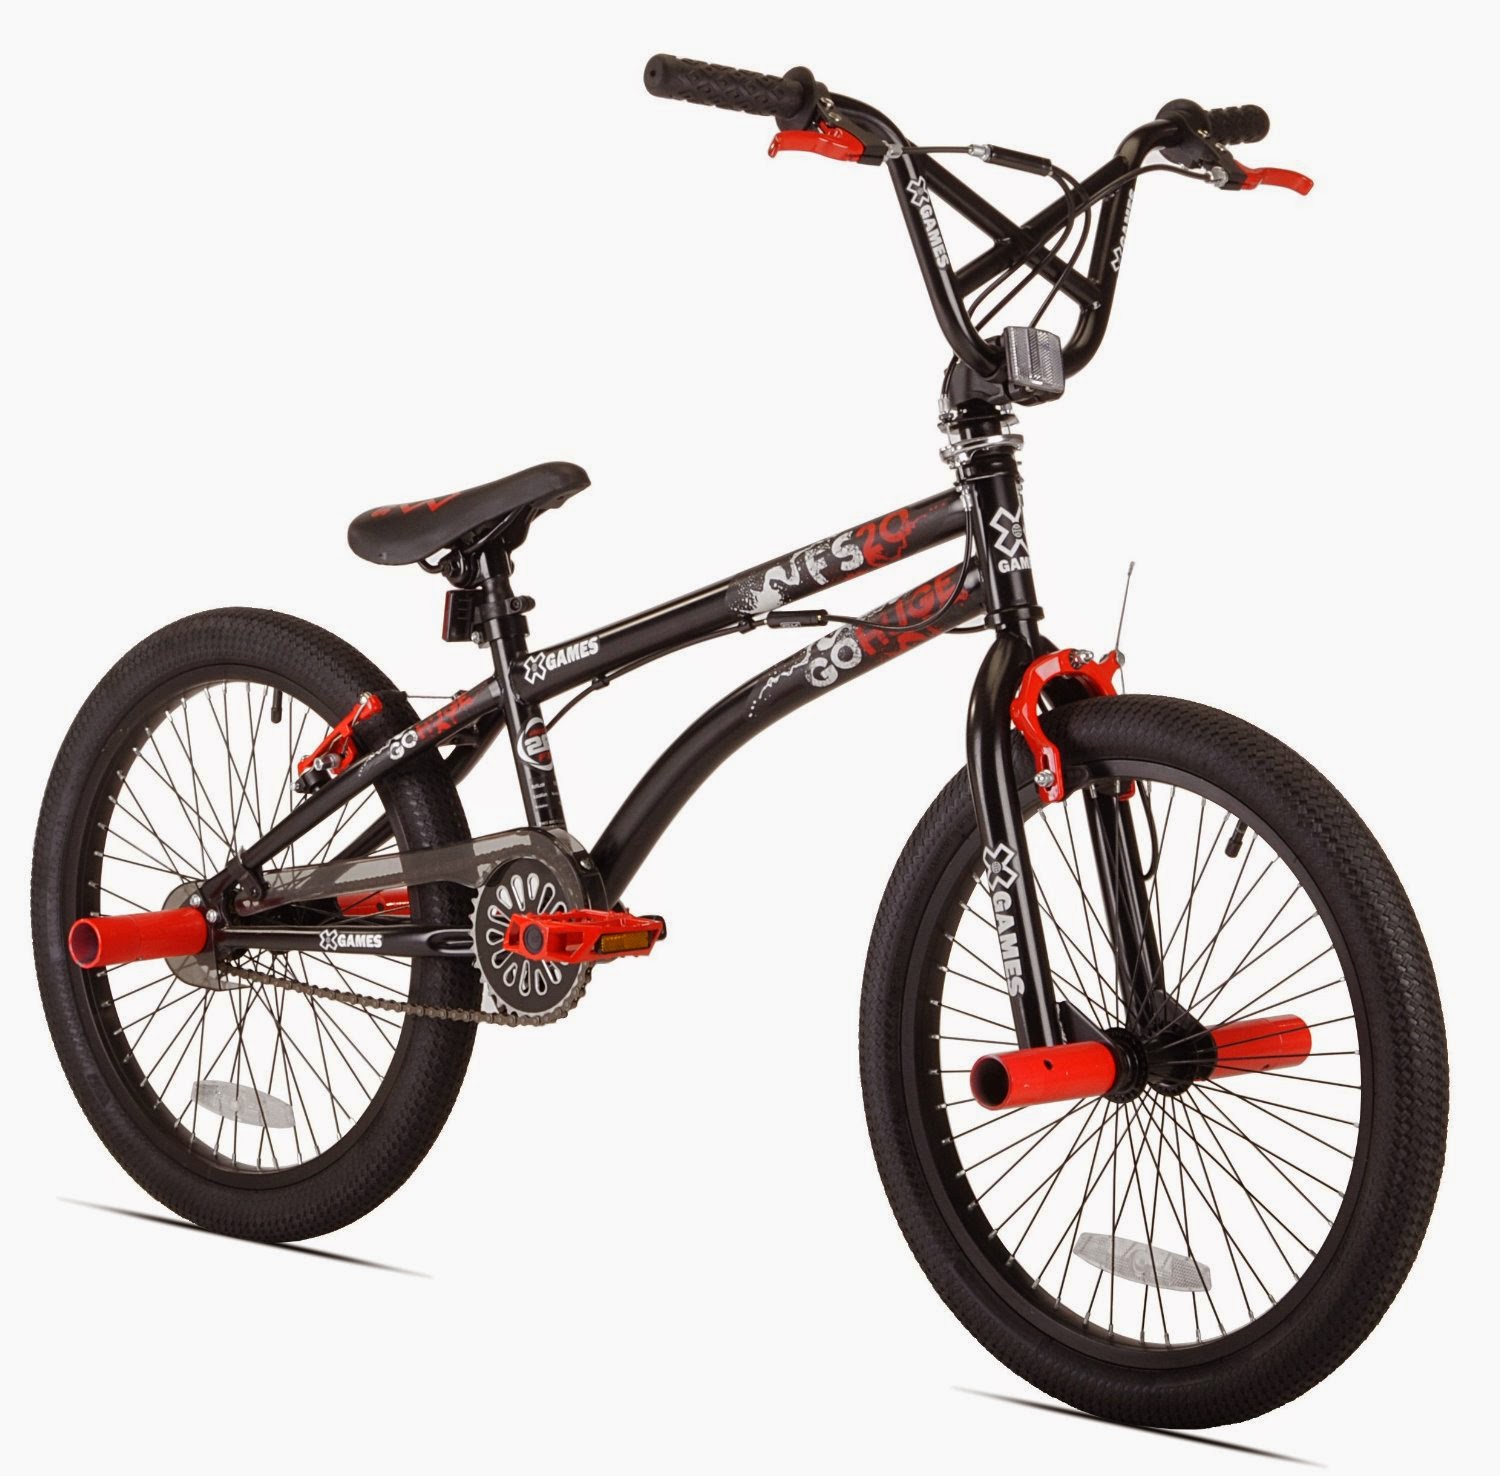 X-Games FS20 Freestyle BMX Bicycle, review, kids bike for tricks and fun, tig-welded custom-freestyle frame and fork, 20" wheels, Grippy smooth street tires